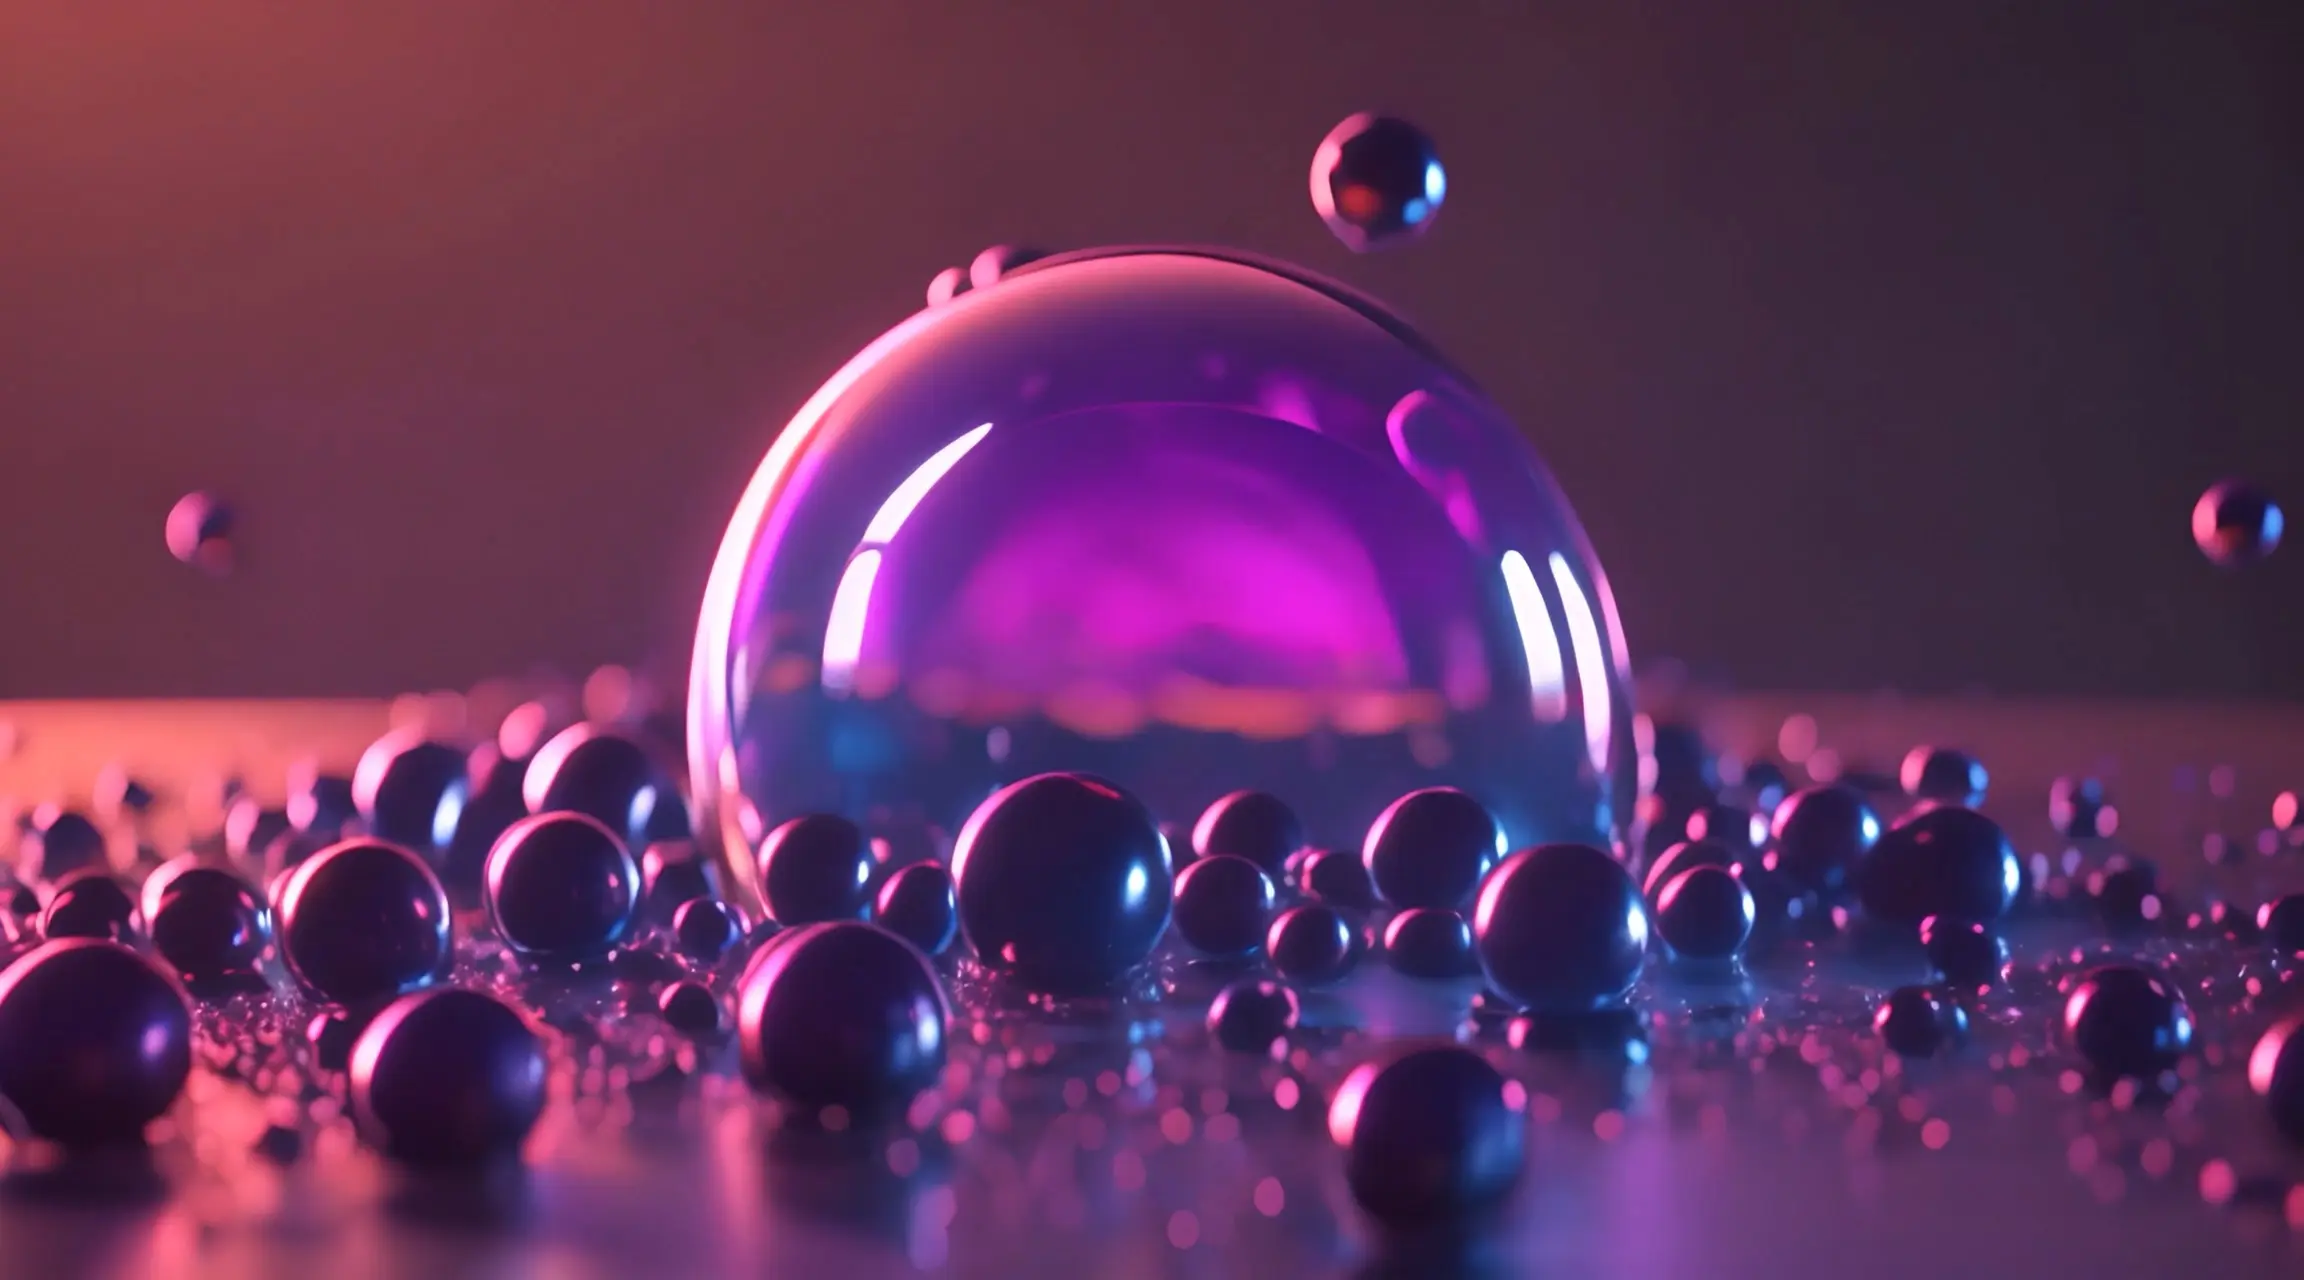 Abstract Glass Bubbles in Motion Video Clip